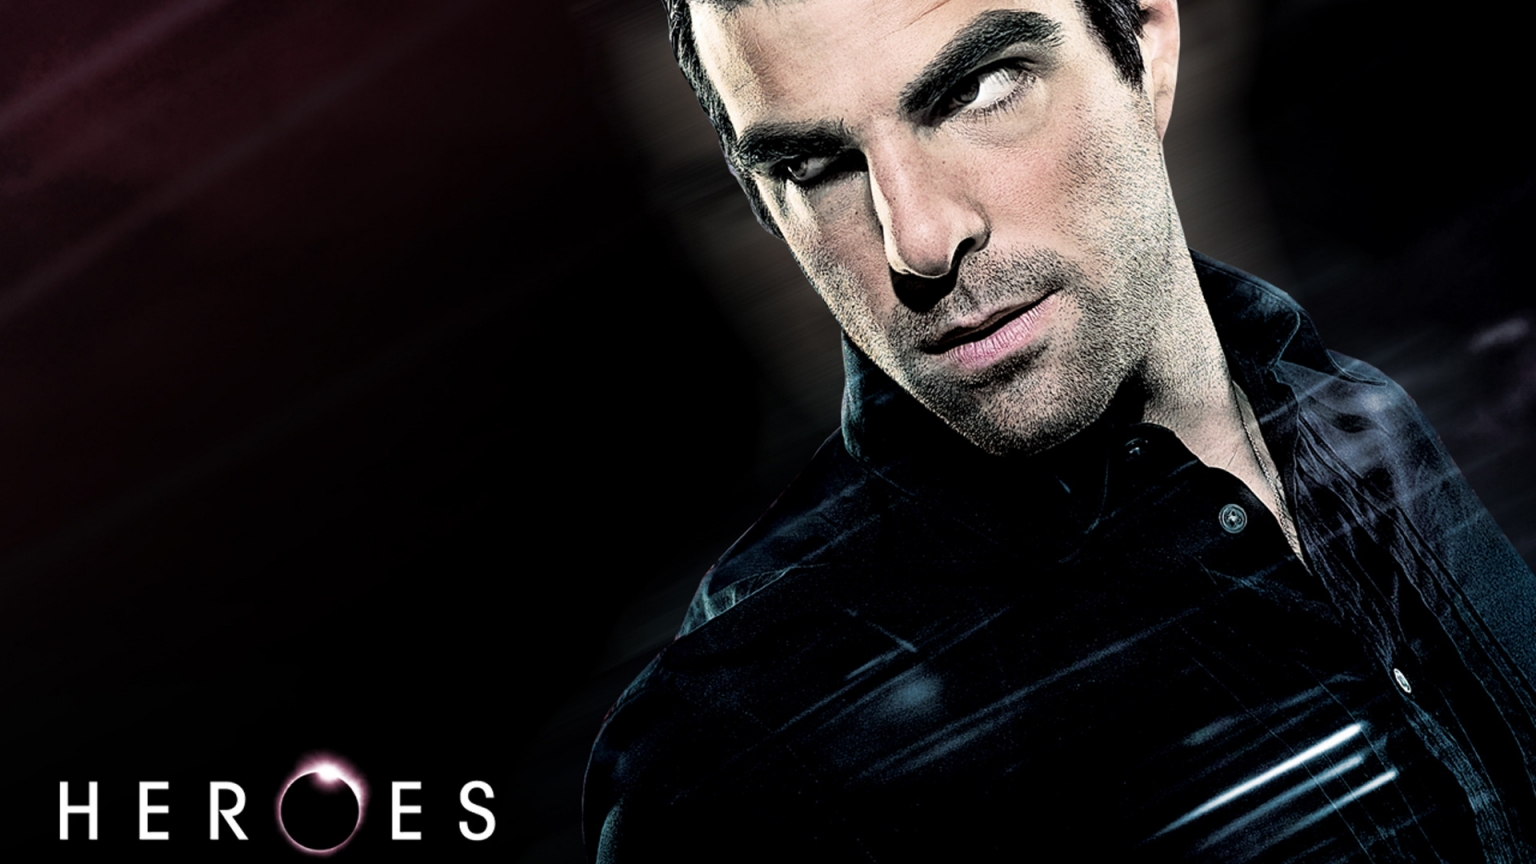 Heroes Sylar for 1536 x 864 HDTV resolution